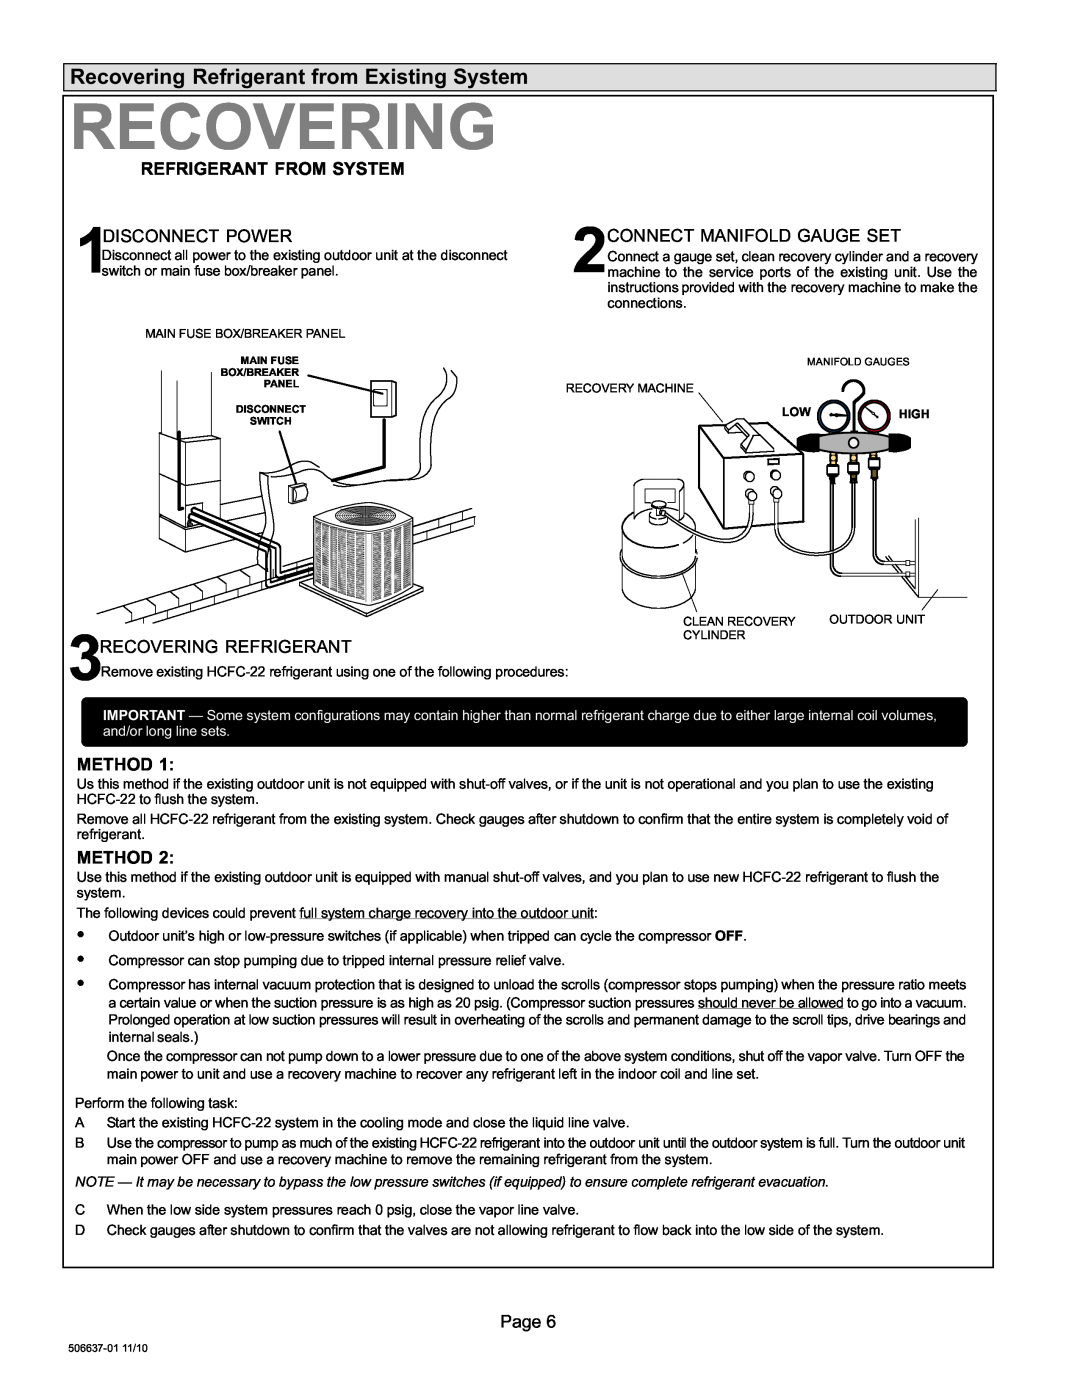 Lenox 506637-01 installation instructions Recovering Refrigerant from Existing System, and/or long line sets 